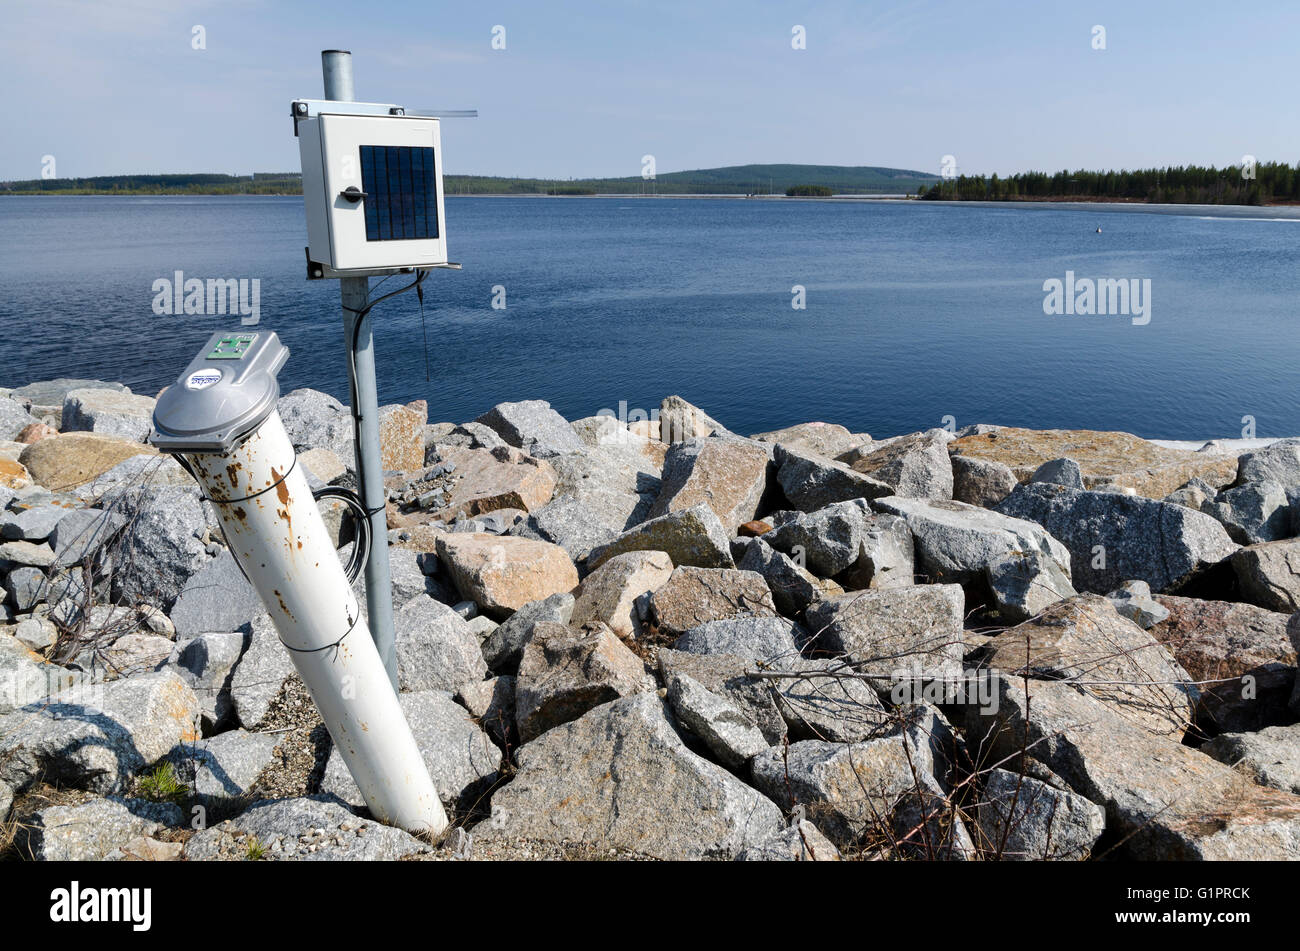 Remote surveillance of movements in a power plant embanking with power from the sun, picture from the North of Sweden. Stock Photo